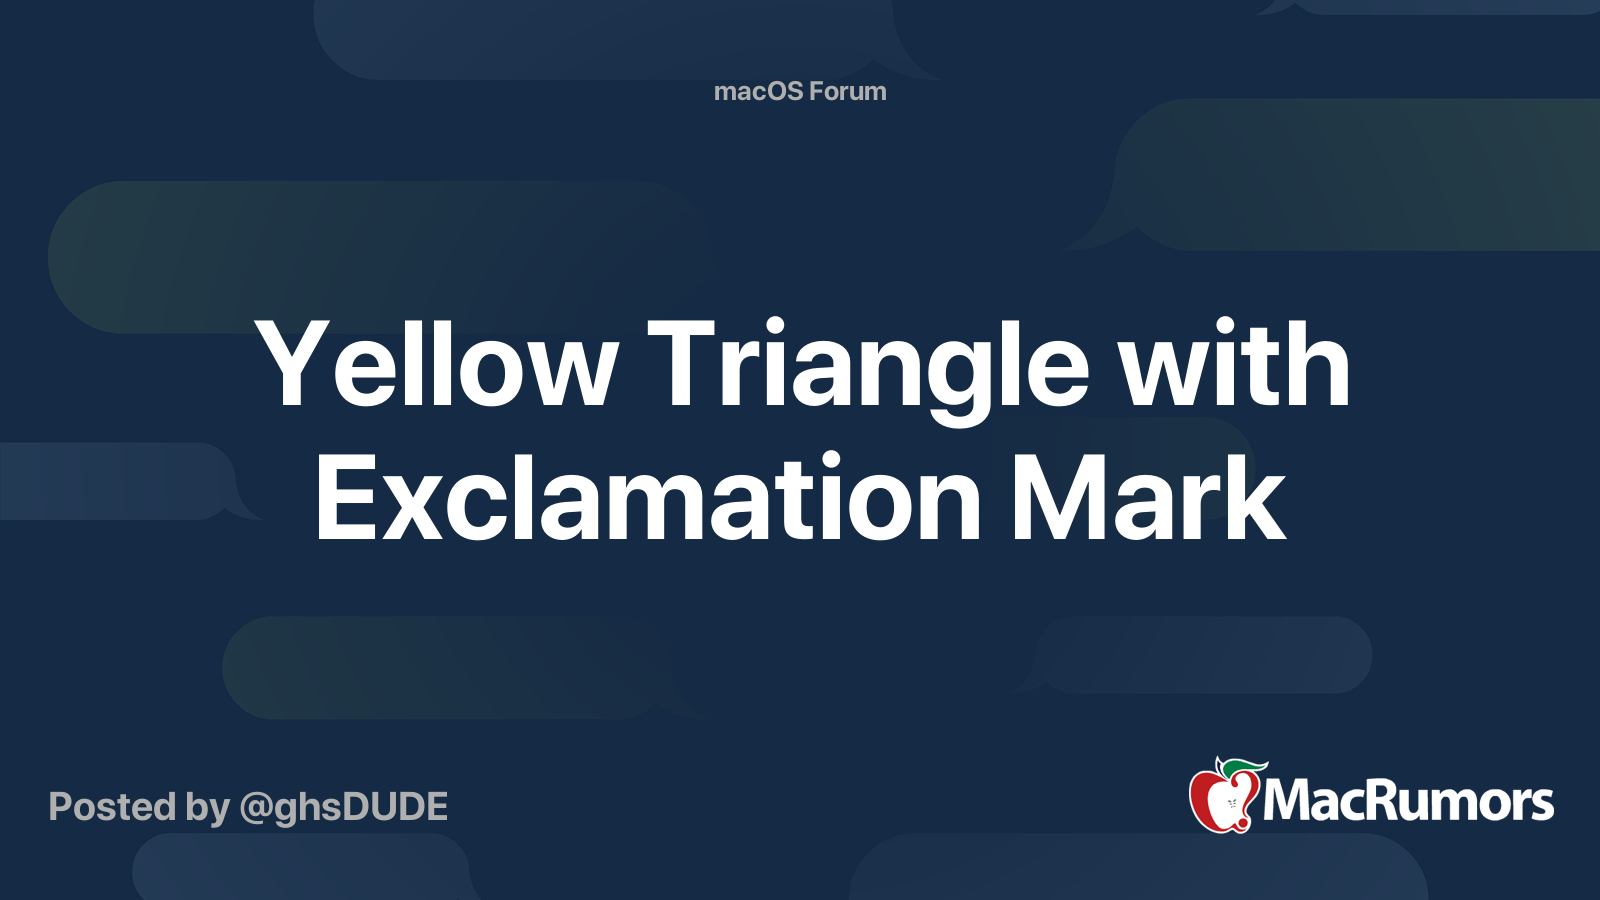 yellow triangle exclamation mark